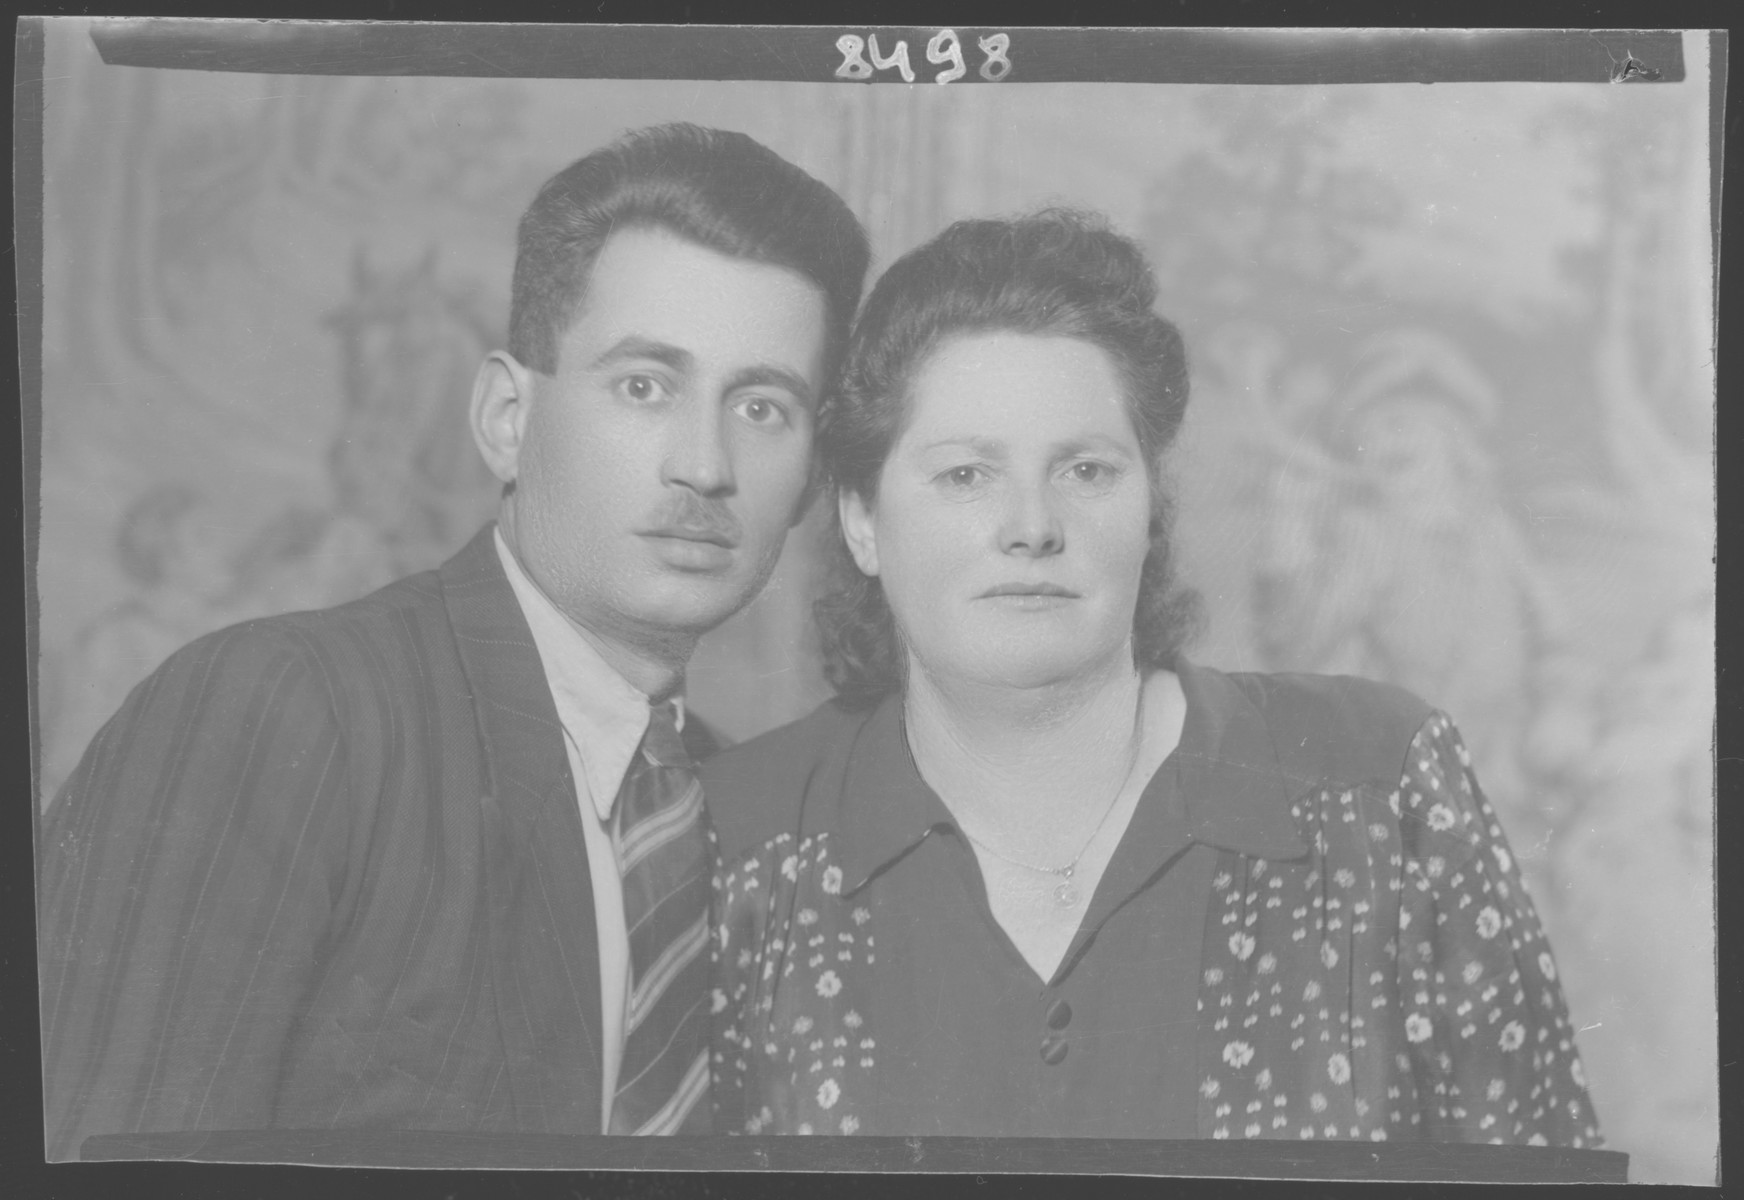 Studio portrait of Adolf Kohn and his wife Juliska.

This photograph was taken after the war.  Juliska was in Auschwitz; Adolf Kohn was in a labor camp, and they married after the war.  Adolf Kohn's first wife Malka perished in Auschwitz.